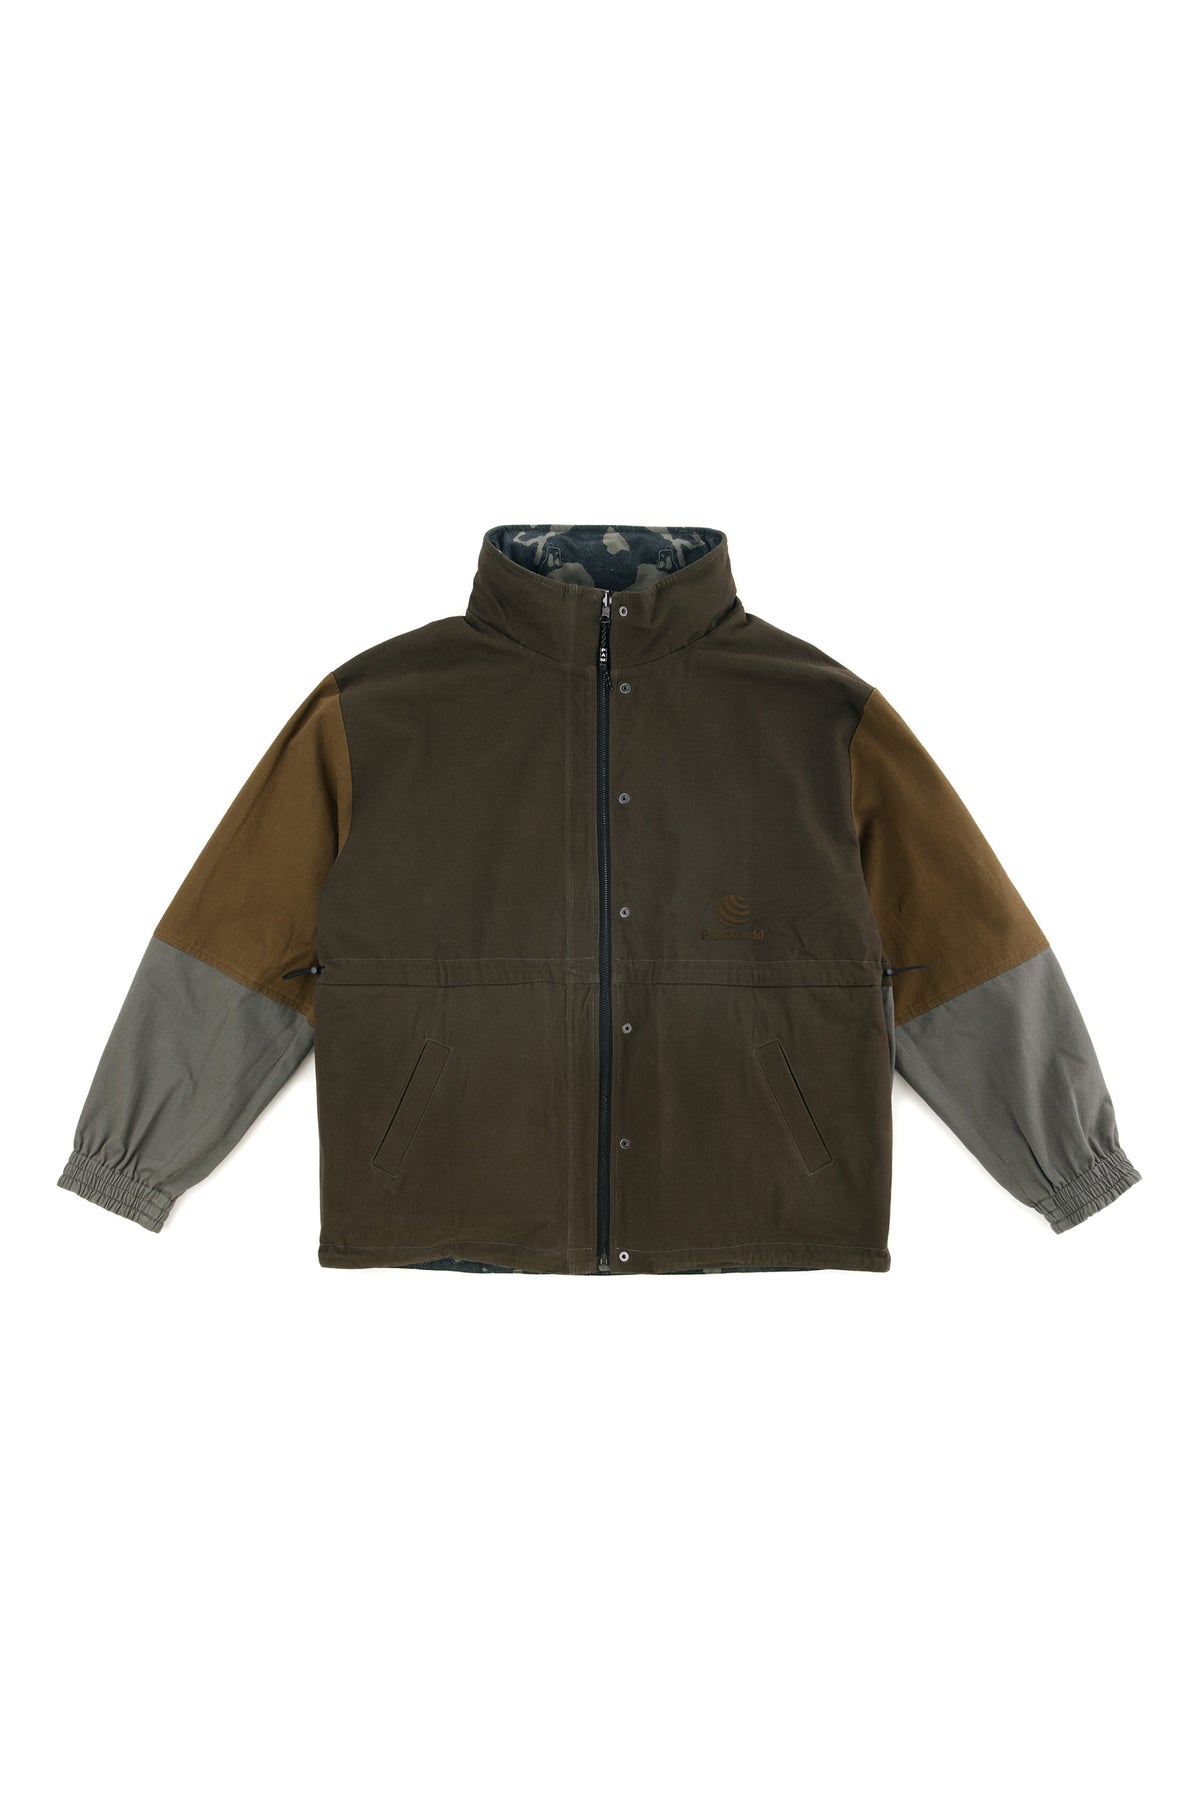 P.A.M. Reversible Geo Mapping Parka - Multi